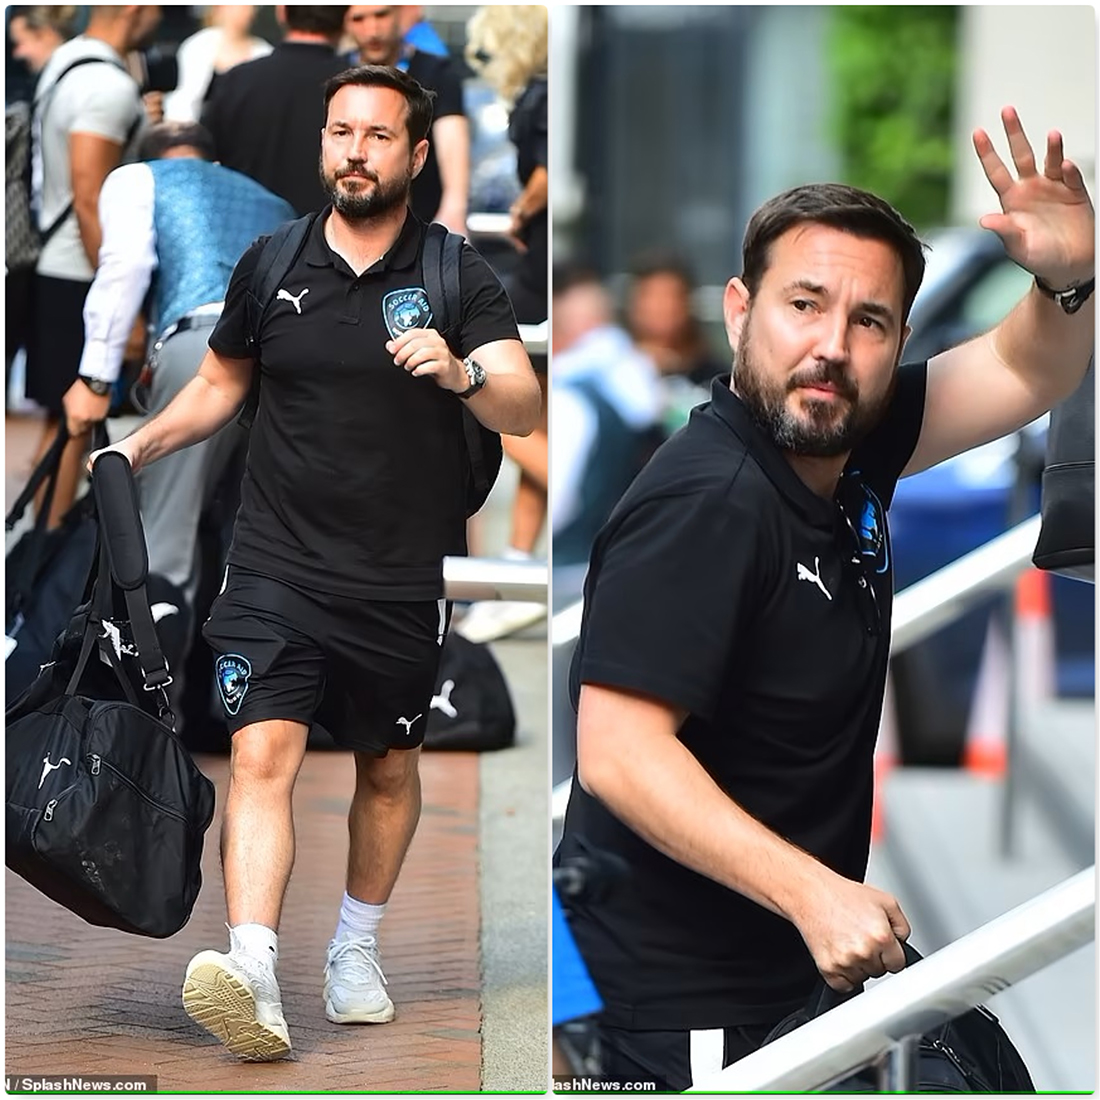 More photos of Martin arriving in Manchester ready for #Socceraid tomorrow ❤️

Remember to tune in tomorrow from 6:30pm on ITV1 ⚽⚽

🤞for 🏆🏆🏆🏆🏆     

📸 :  Shutterstock

#MartinCompston #LineofDuty #Socceraid2023